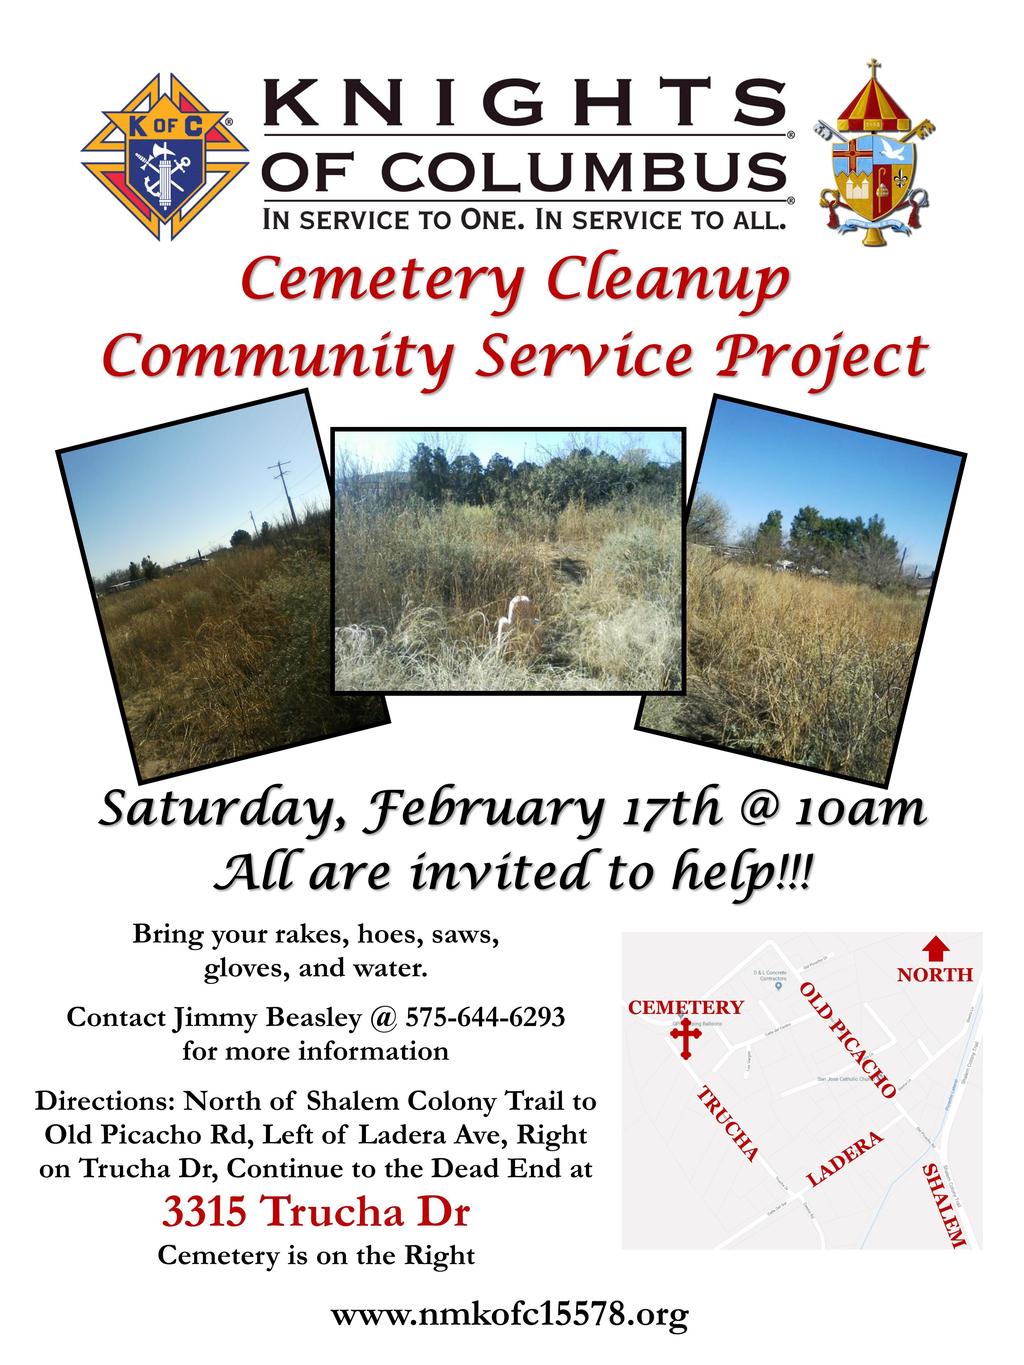 In February, our council will lead the cleanup activities at the Old Picacho Cemetery.